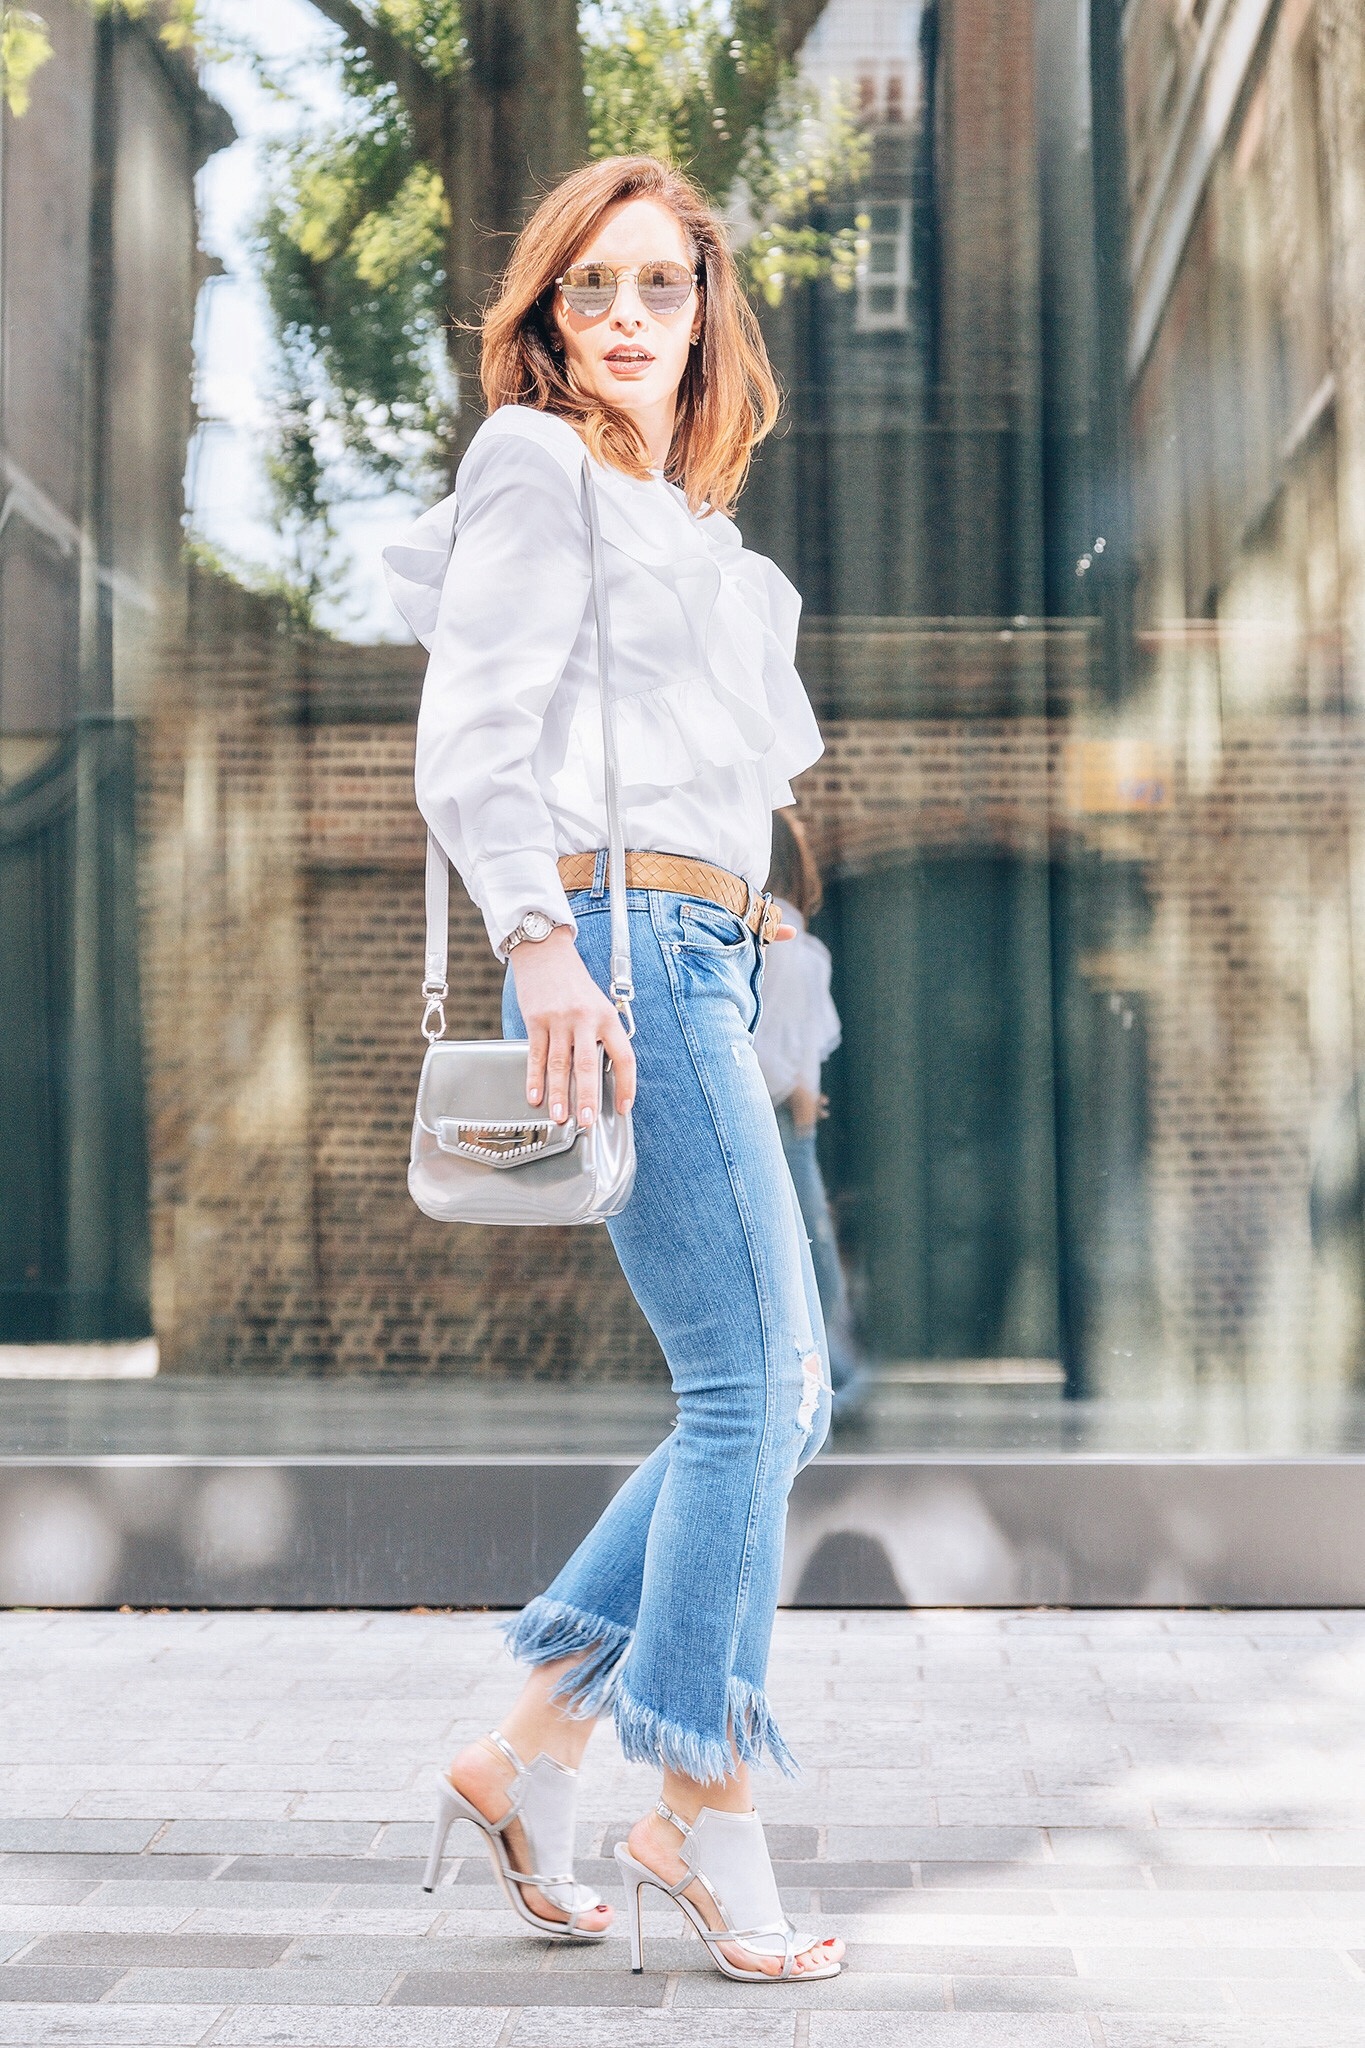 How to wear fringe jeans